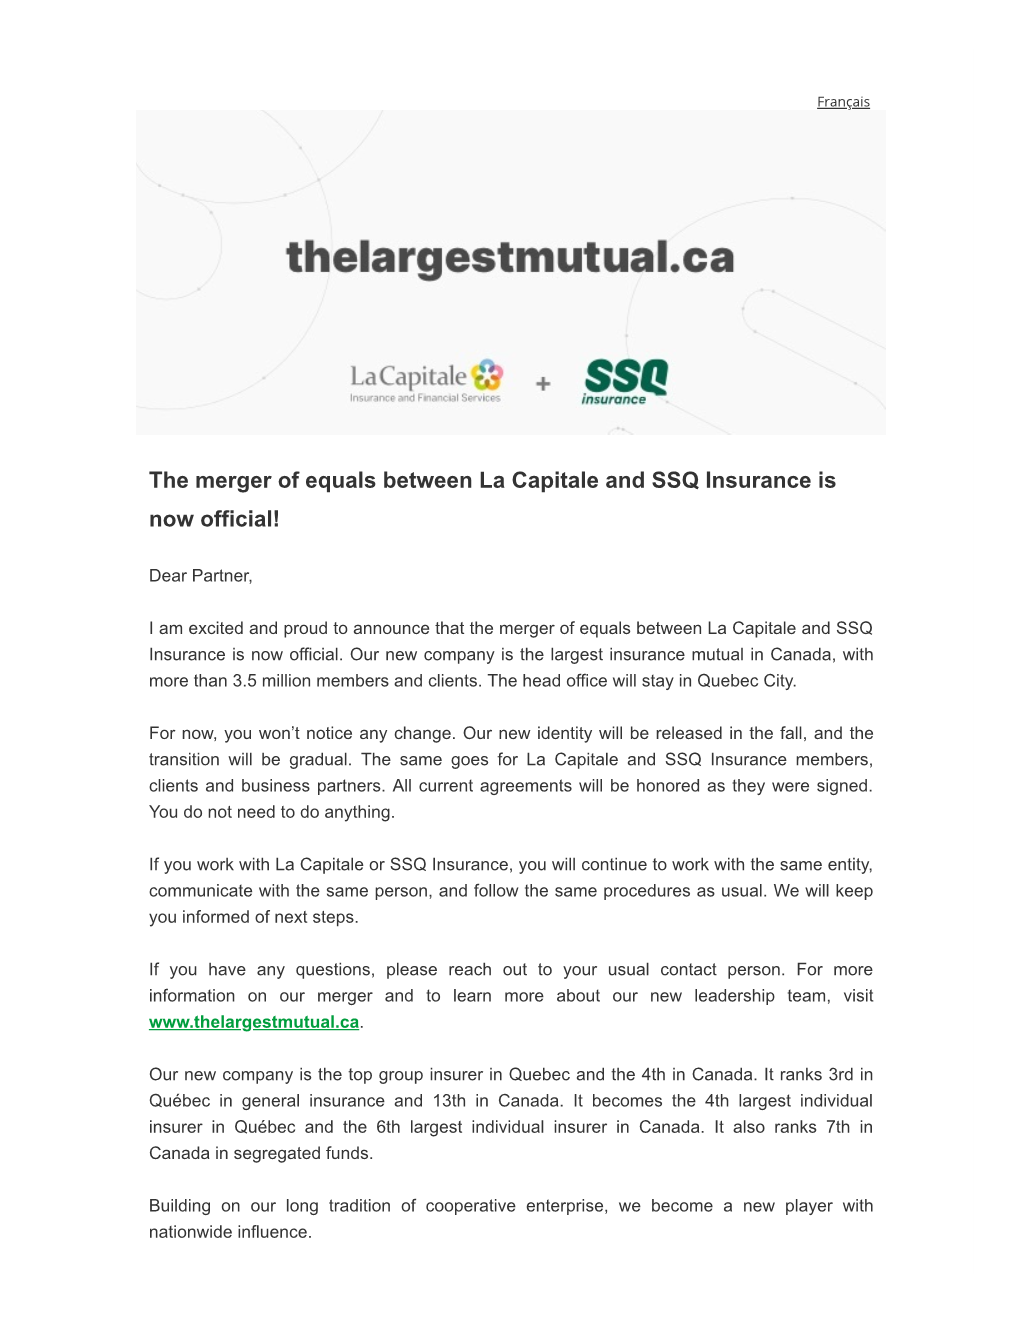 The Merger of Equals Between La Capitale and SSQ Insurance Is Now Official!